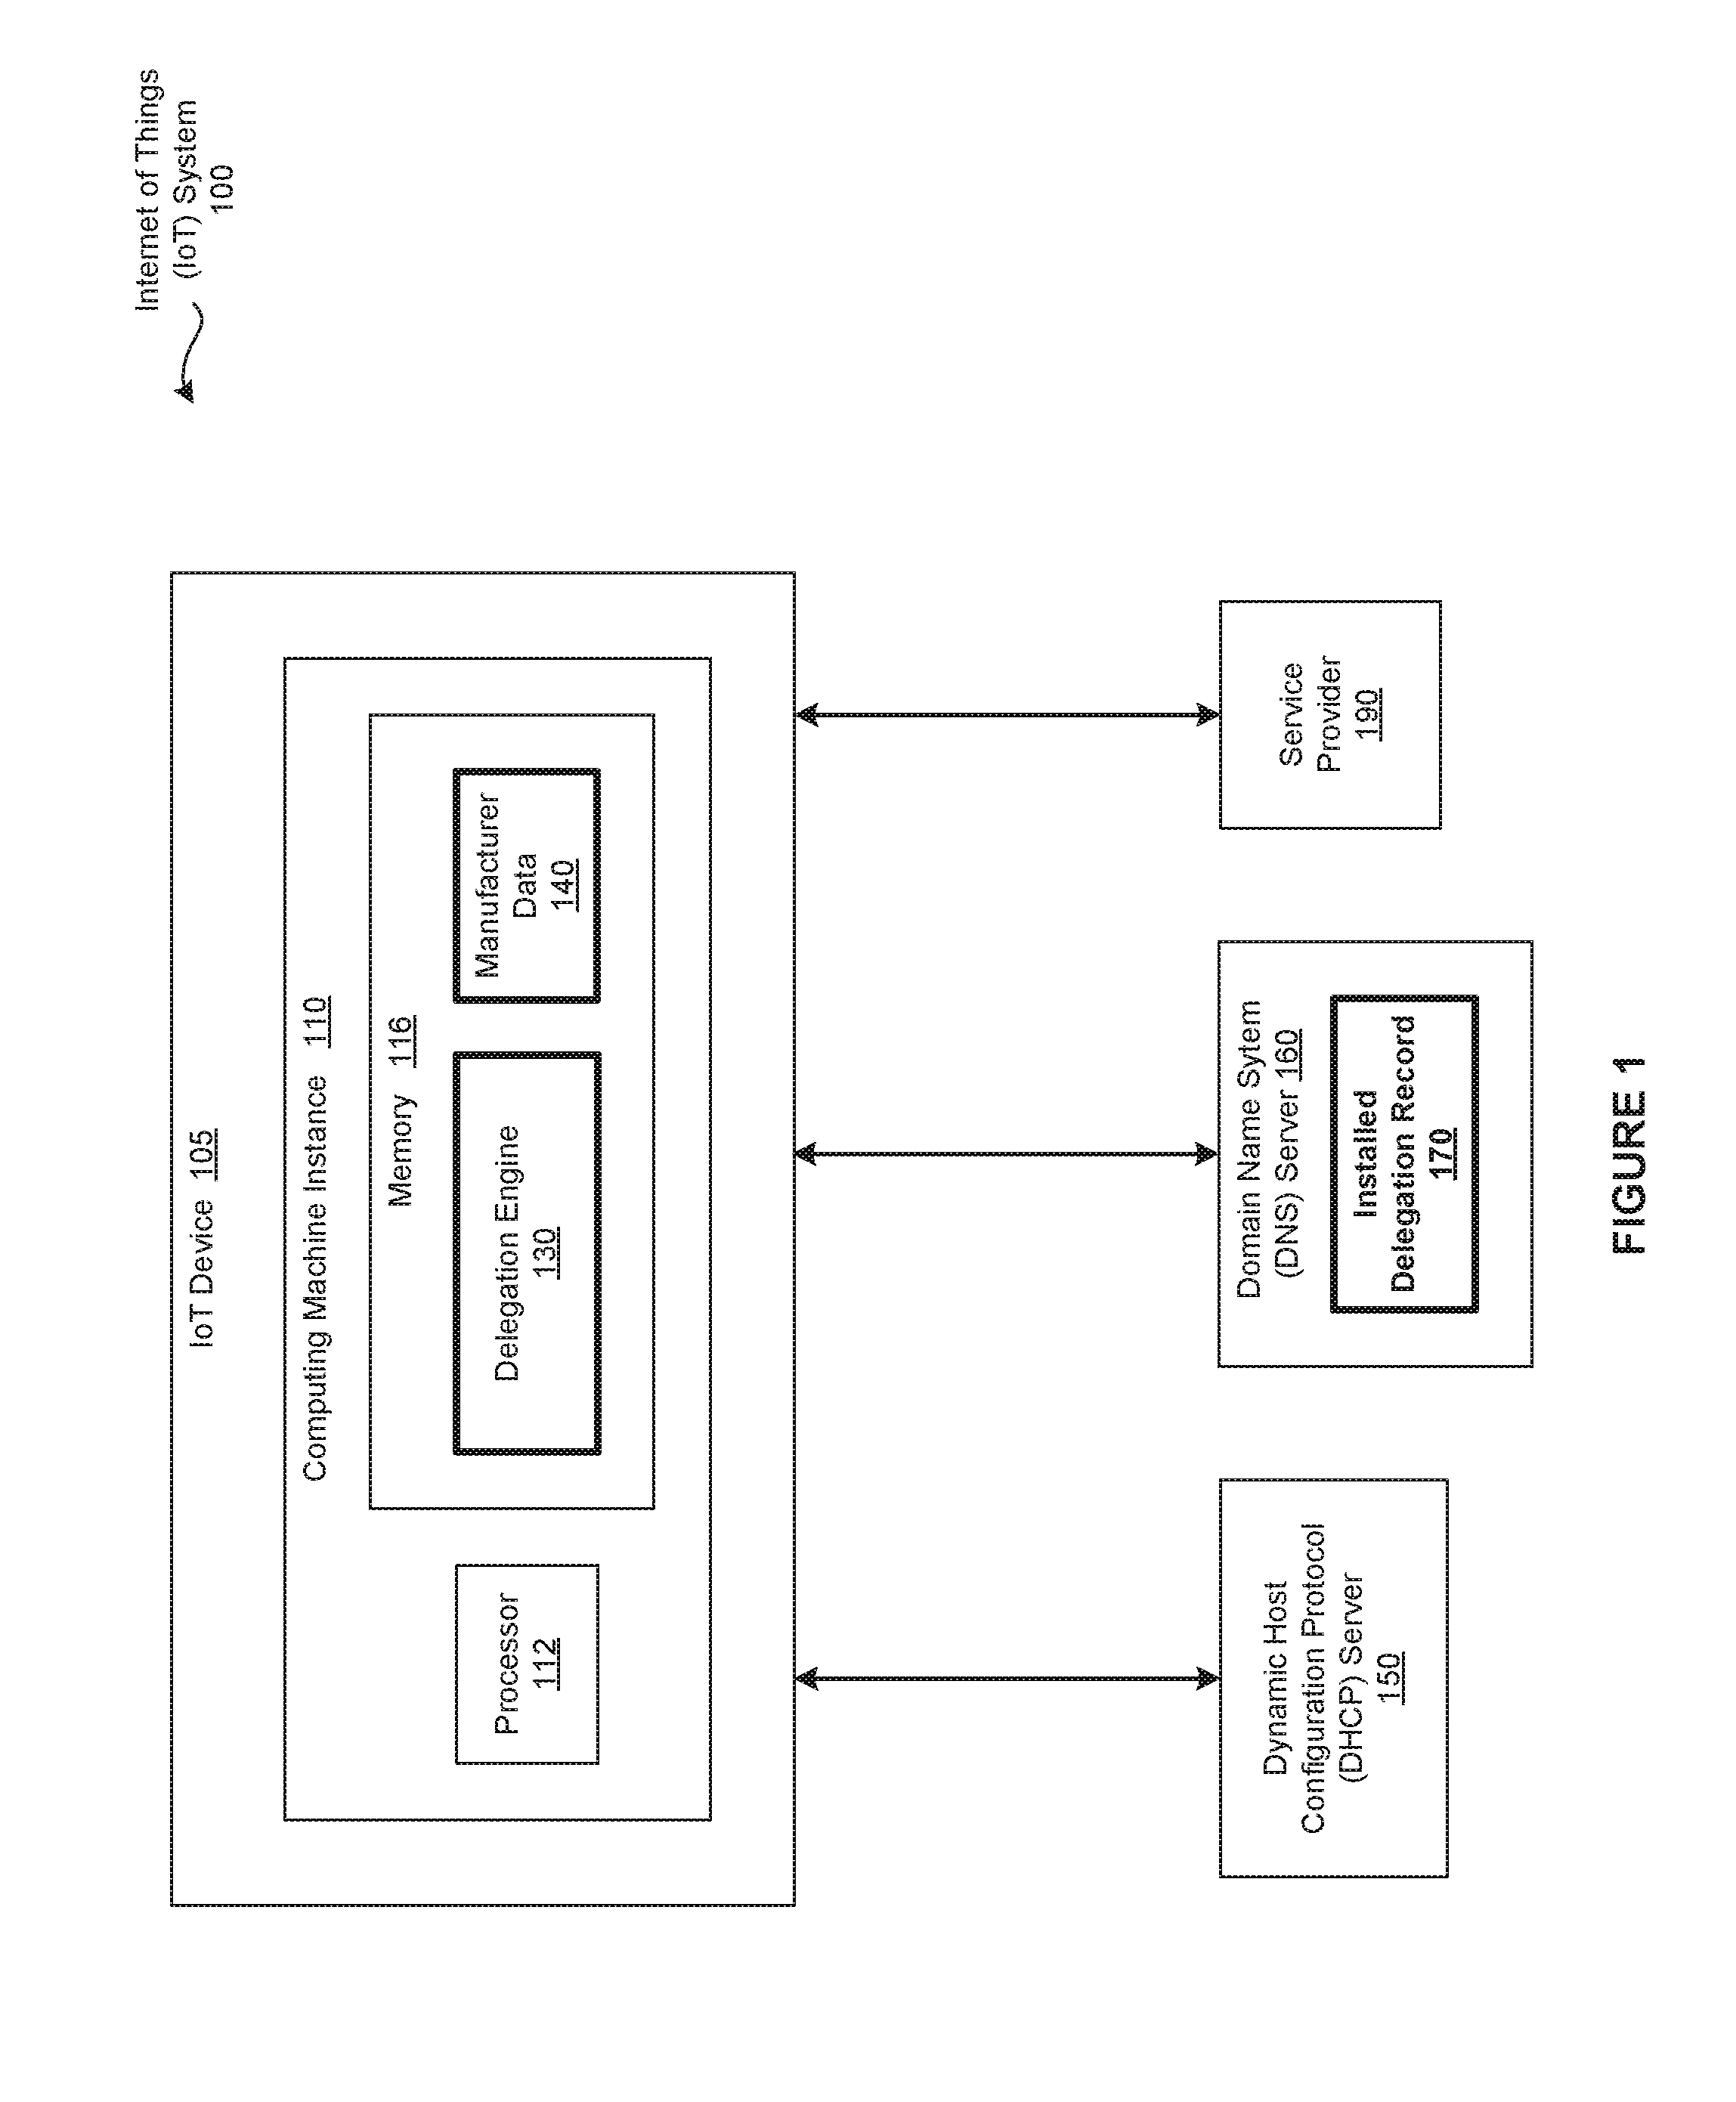 Identifying trusted configuration information to perform service discovery